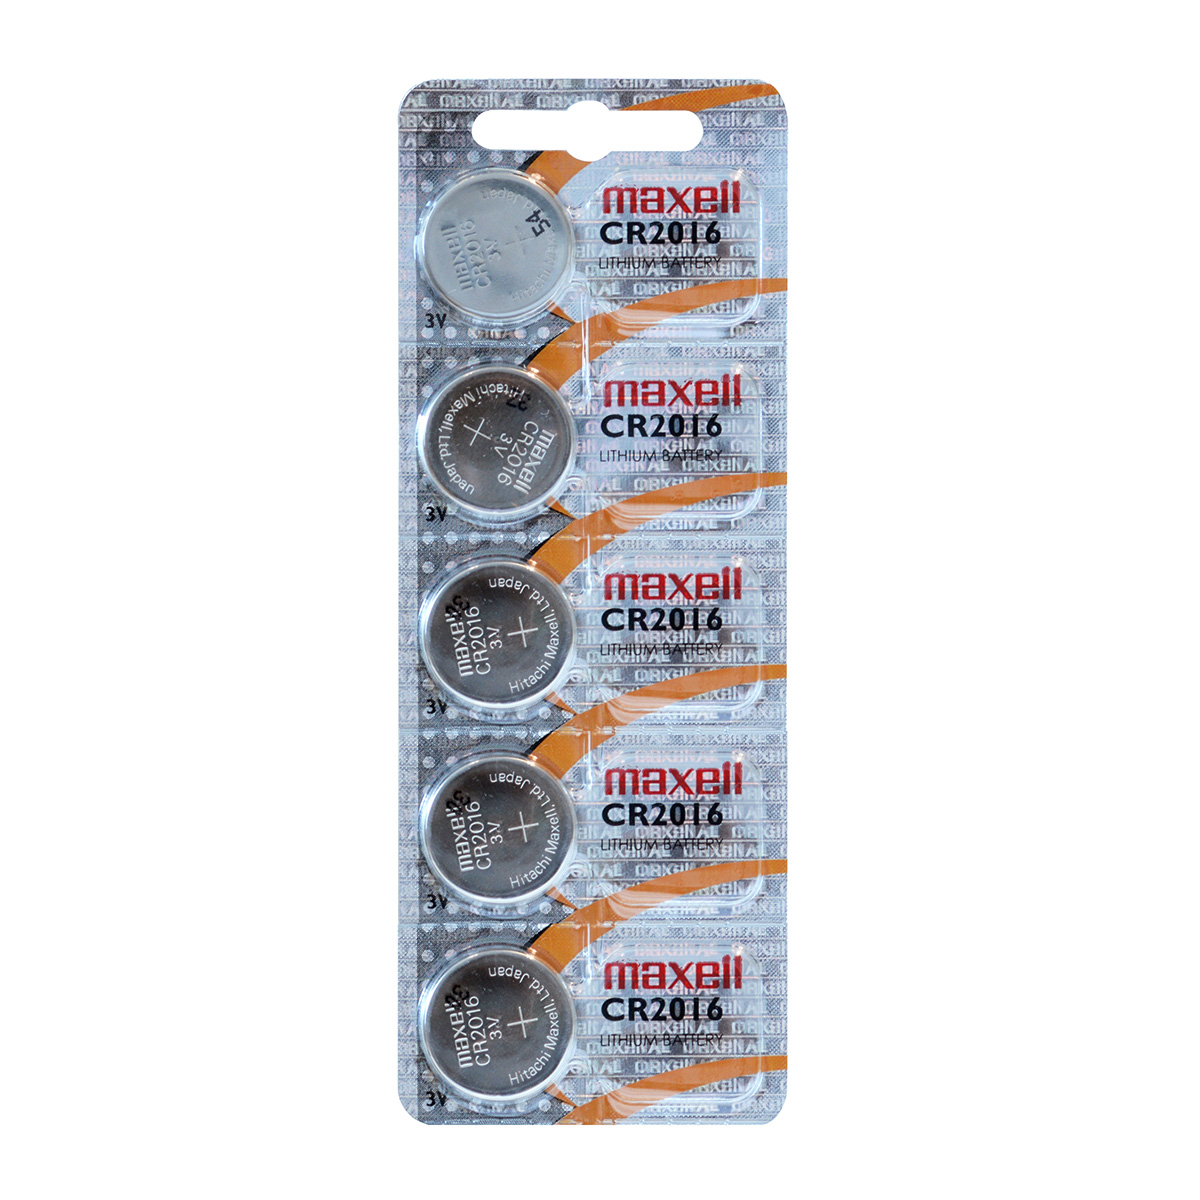 Maxell CR2016 Lithium Stripverpackung